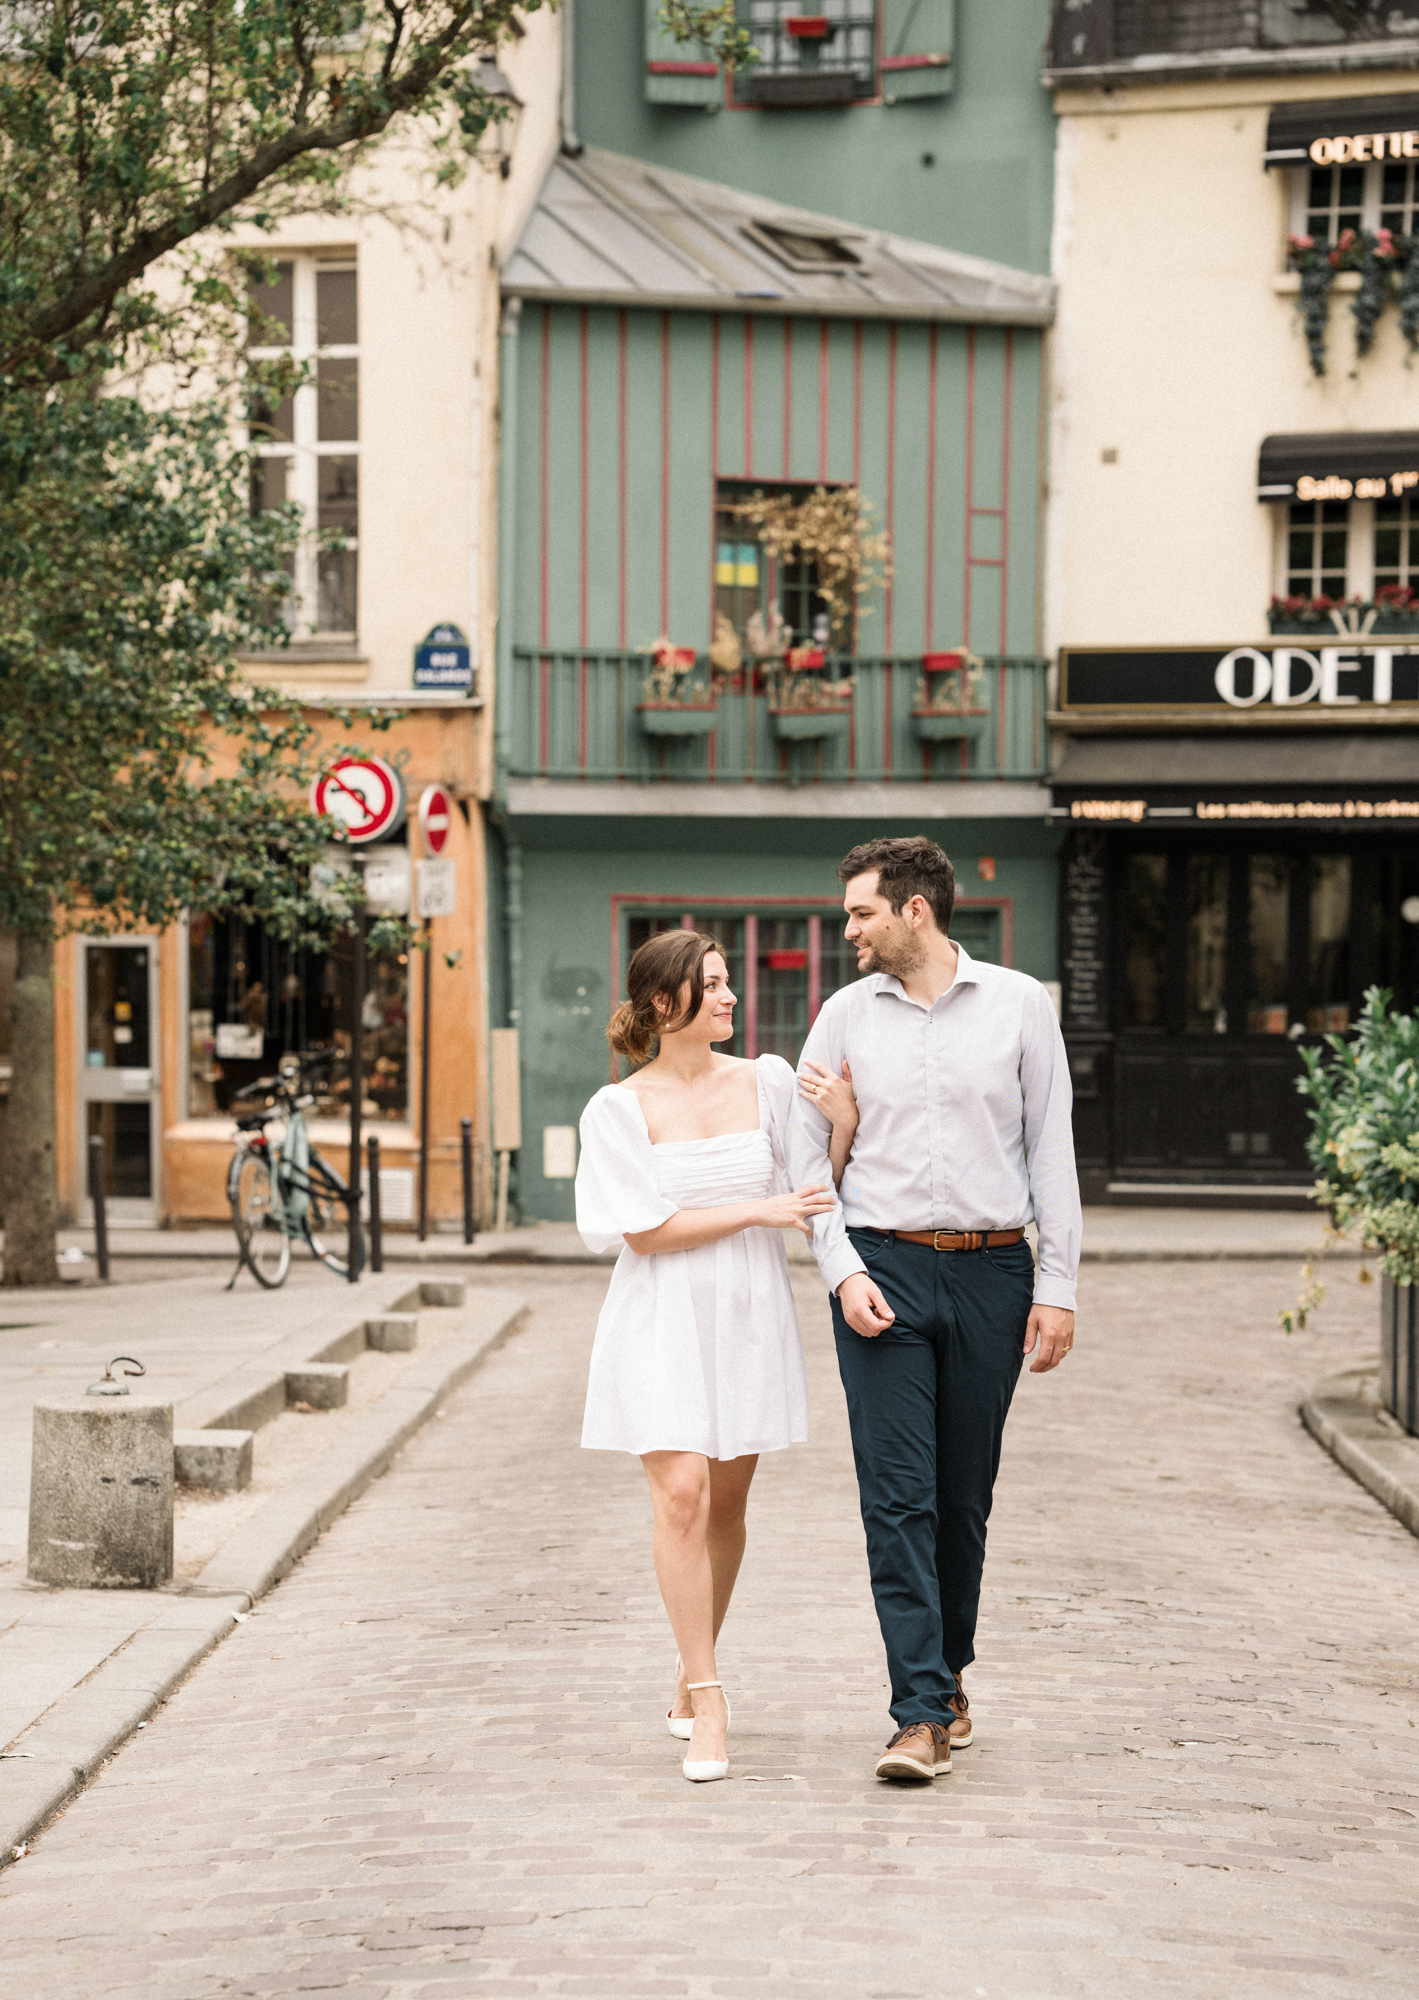 engaged couple walk arm in arm in charming neighborhood in paris